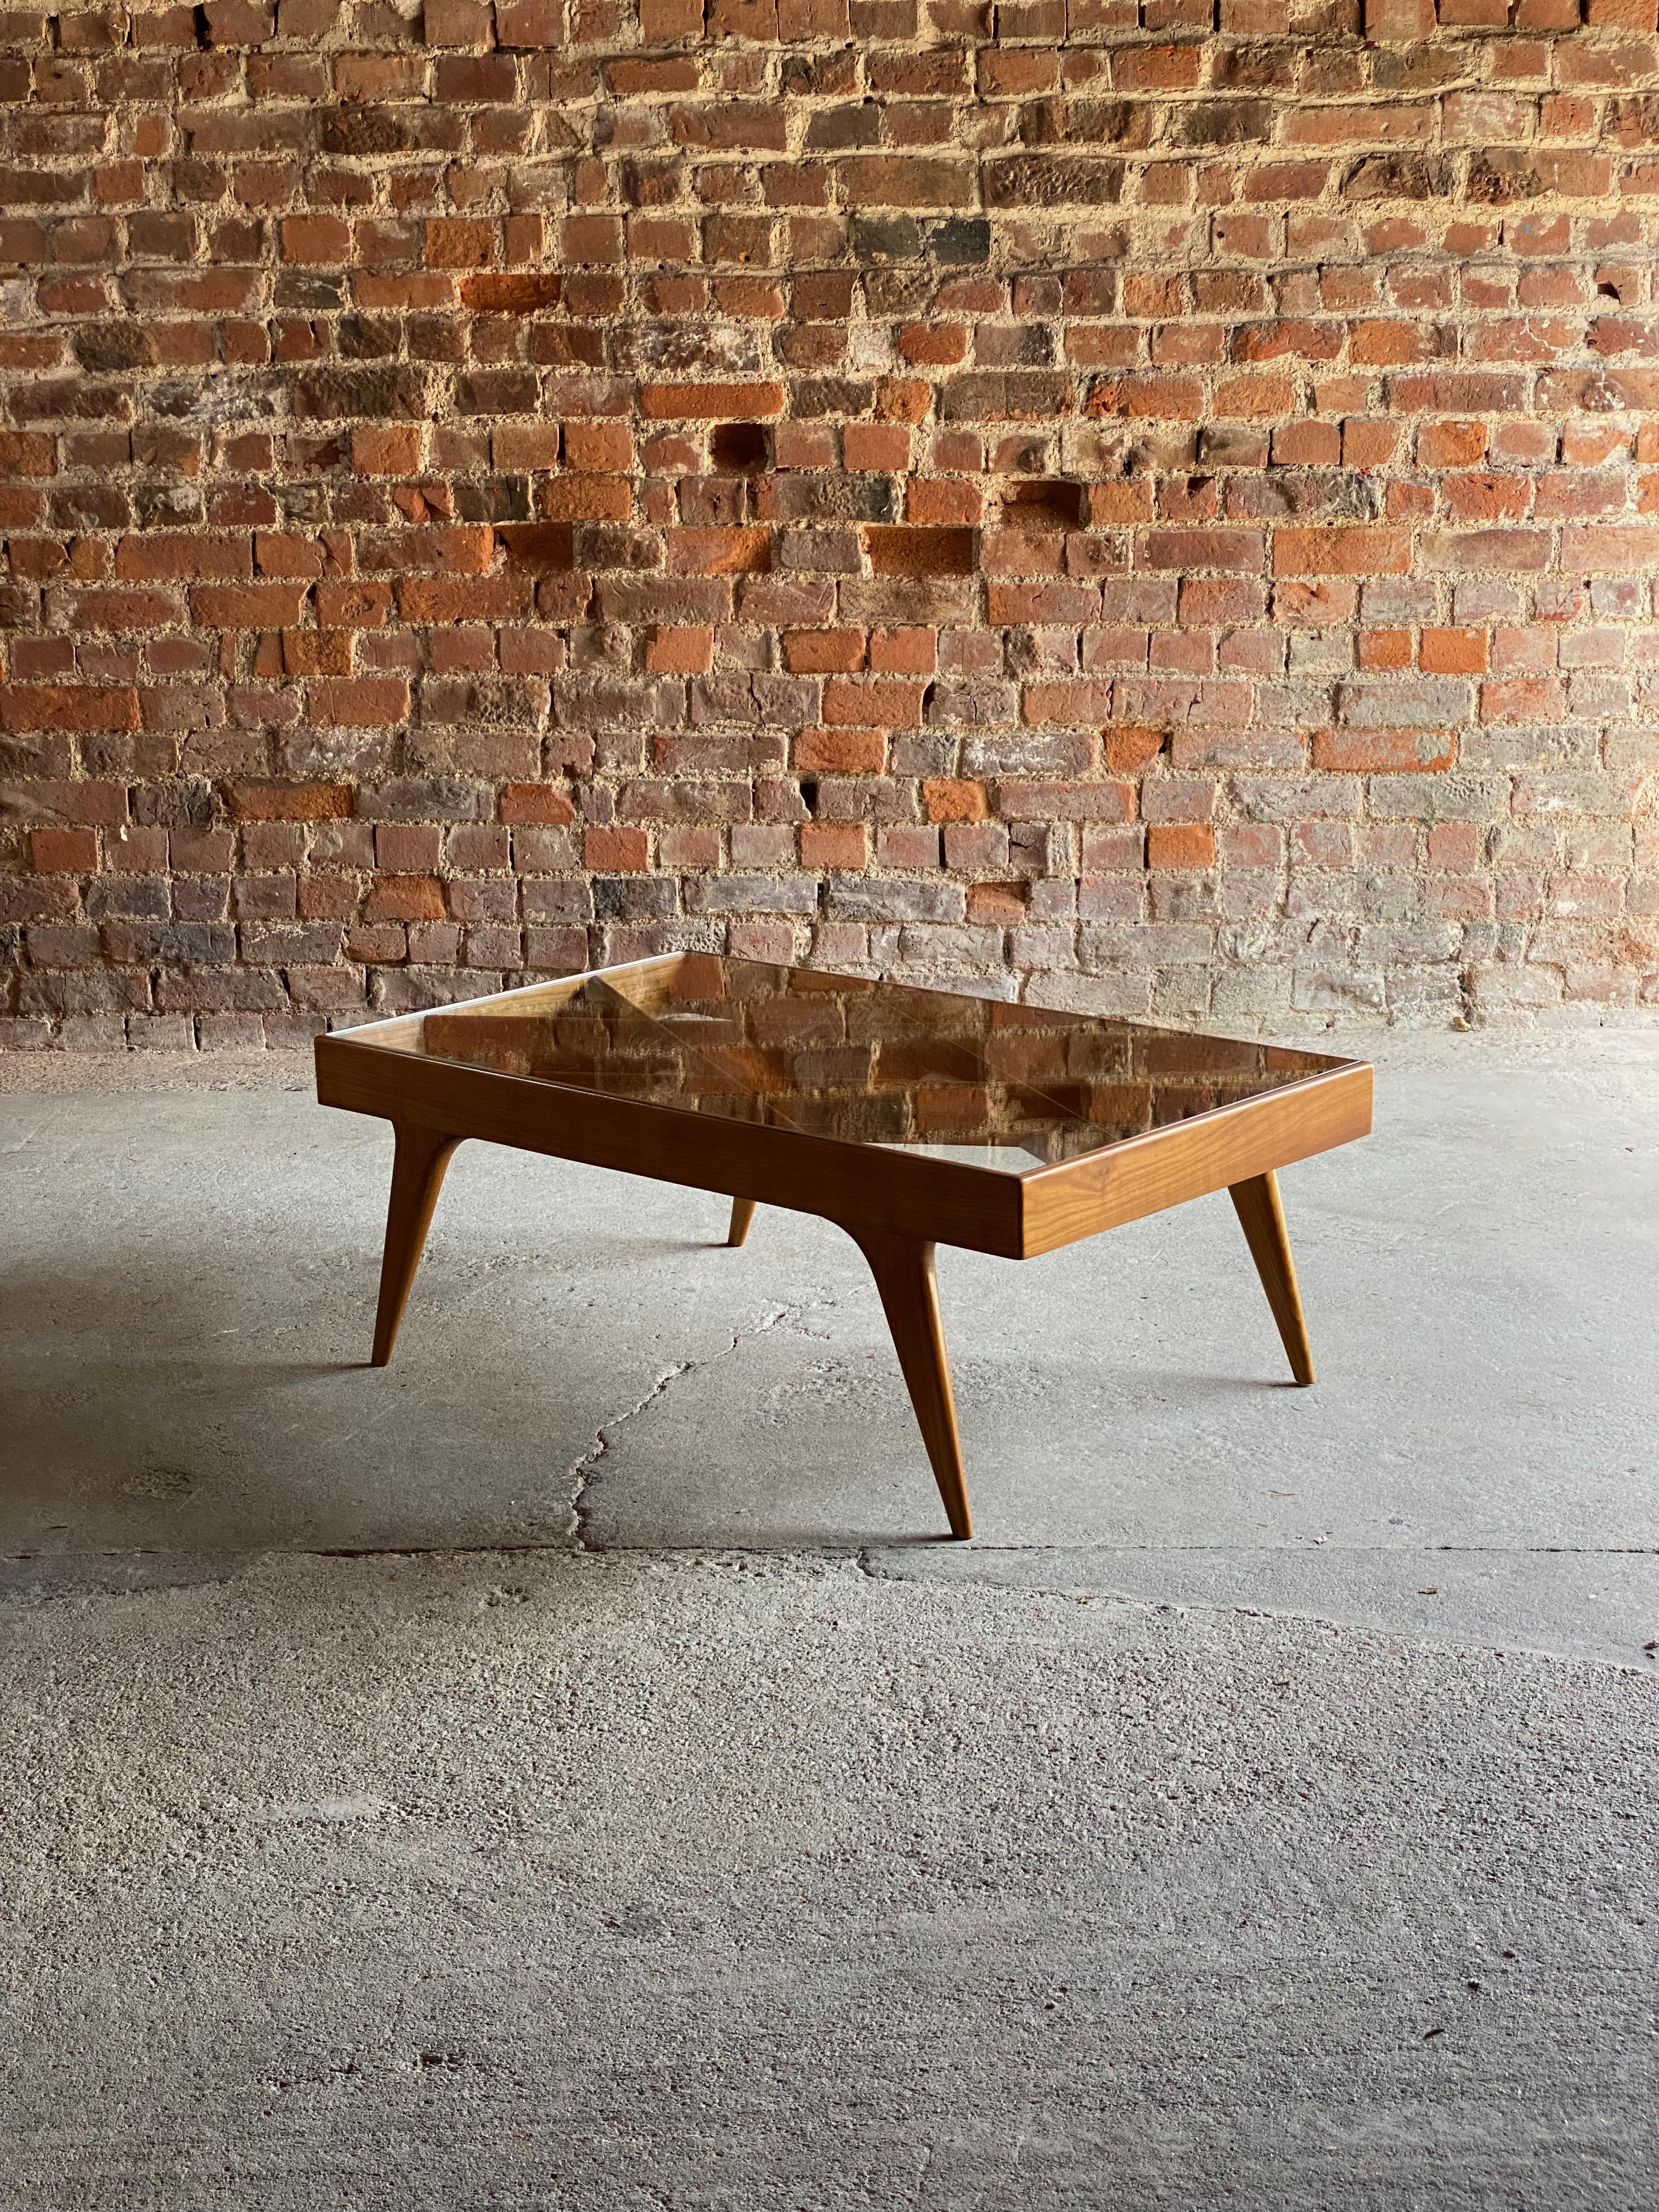 Magnificent mid century walnut & glass coffee table Italy 1950.

Rare and important Lattice Walnut & Glass Coffee Table Milan, Italy Circa 1950, the rectangular glass top with lattice framework over outward swept tapered legs, manufactured by